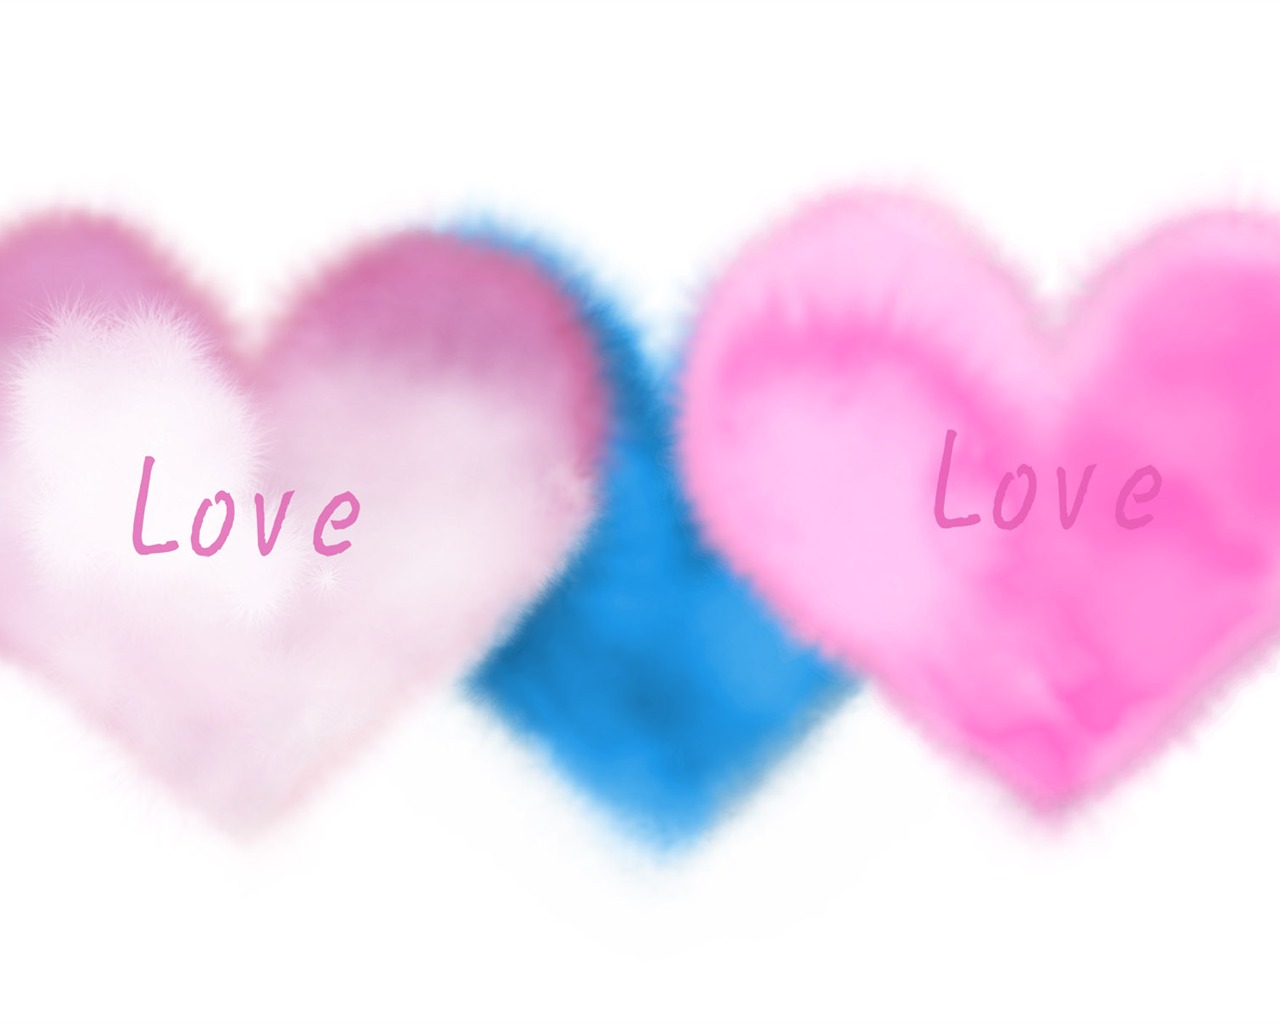 Valentine's Day Love Theme Wallpapers (2) #17 - 1280x1024